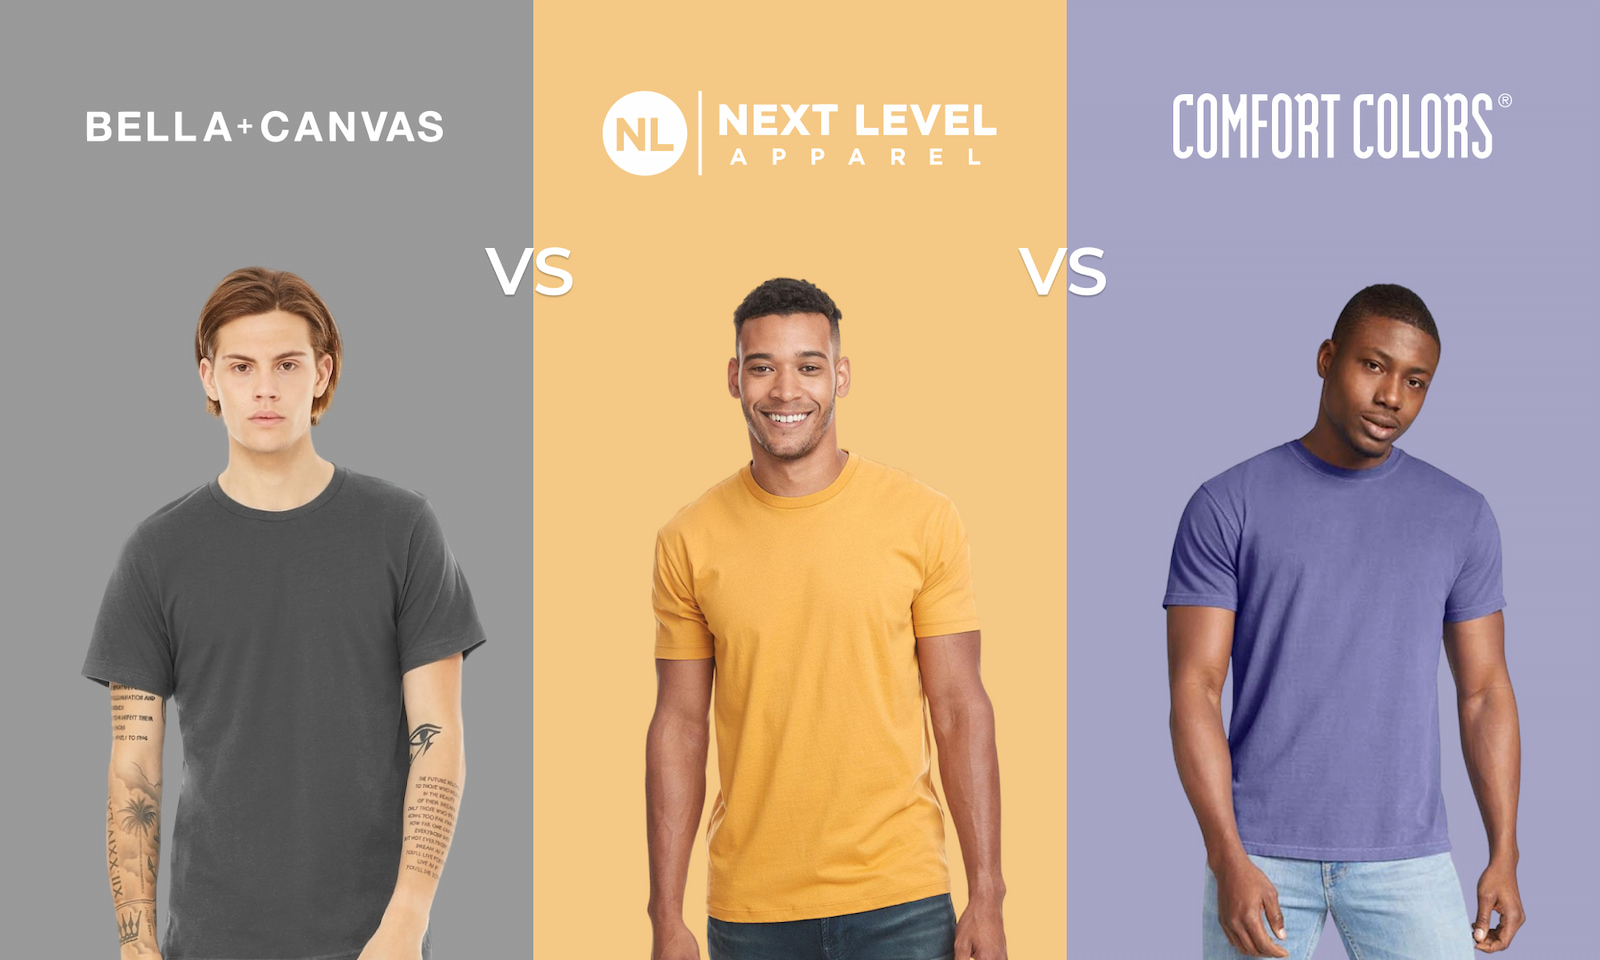 3 men model a t-shirt from Bella+Canvas, Next Level, and Comfort Colors